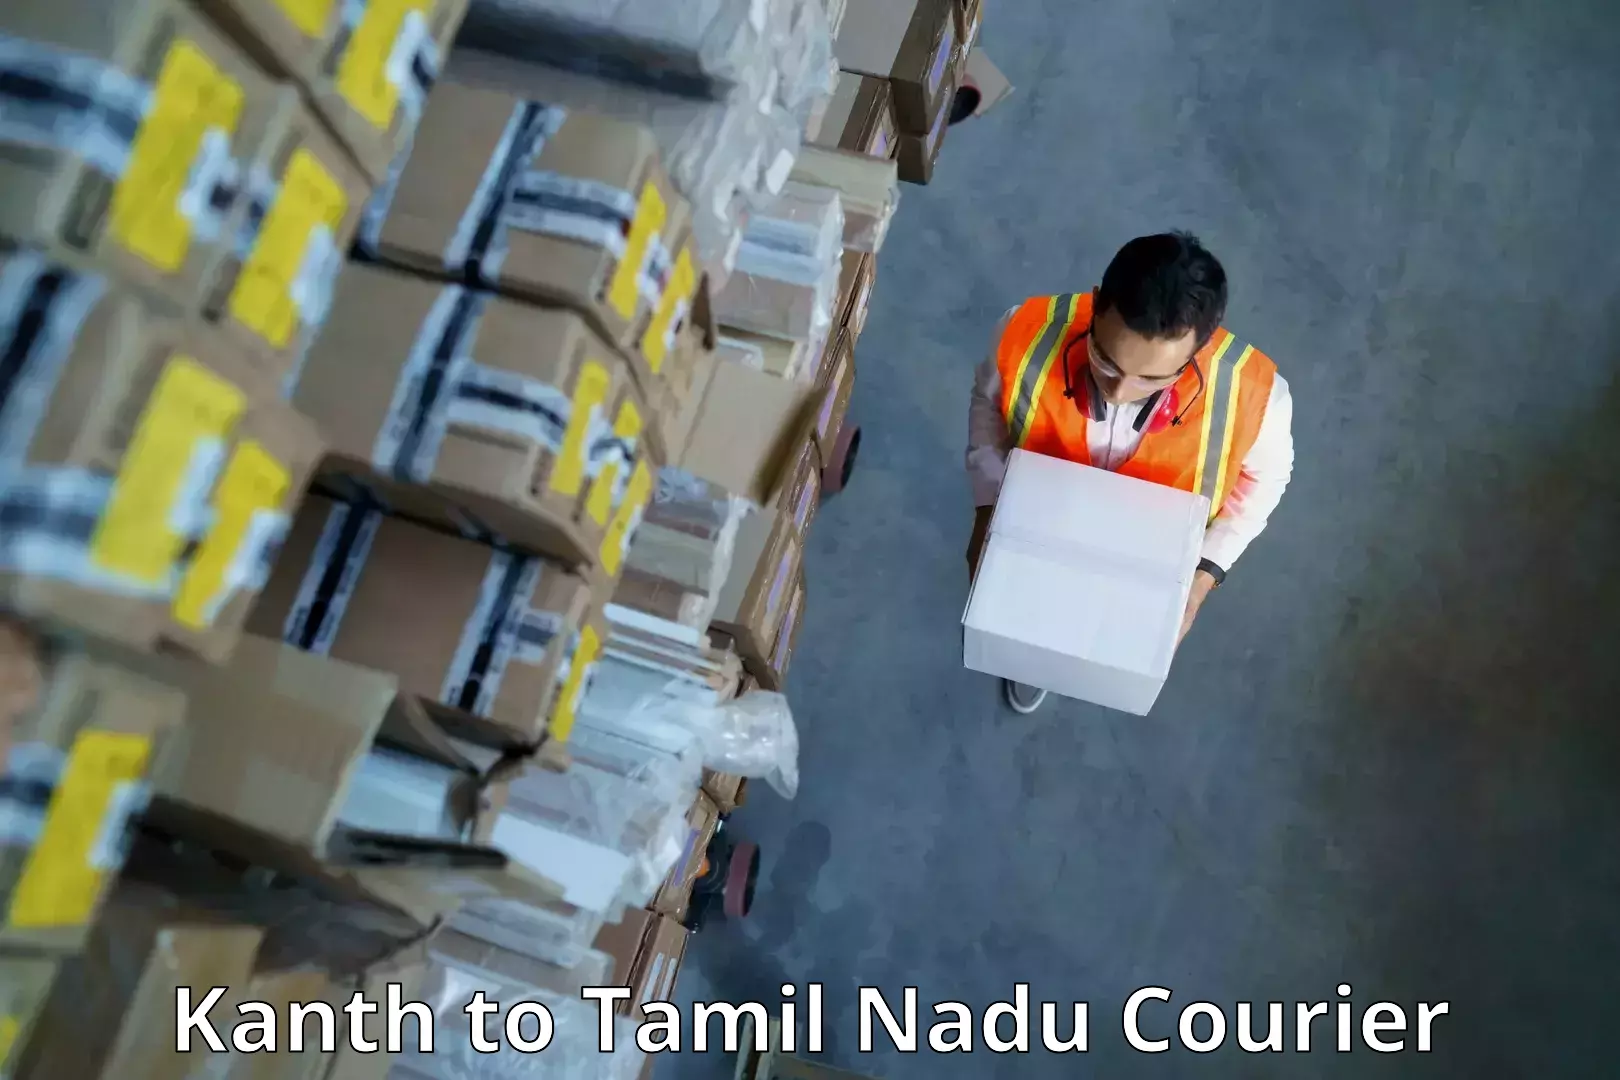 Nationwide shipping services Kanth to Sriperumbudur